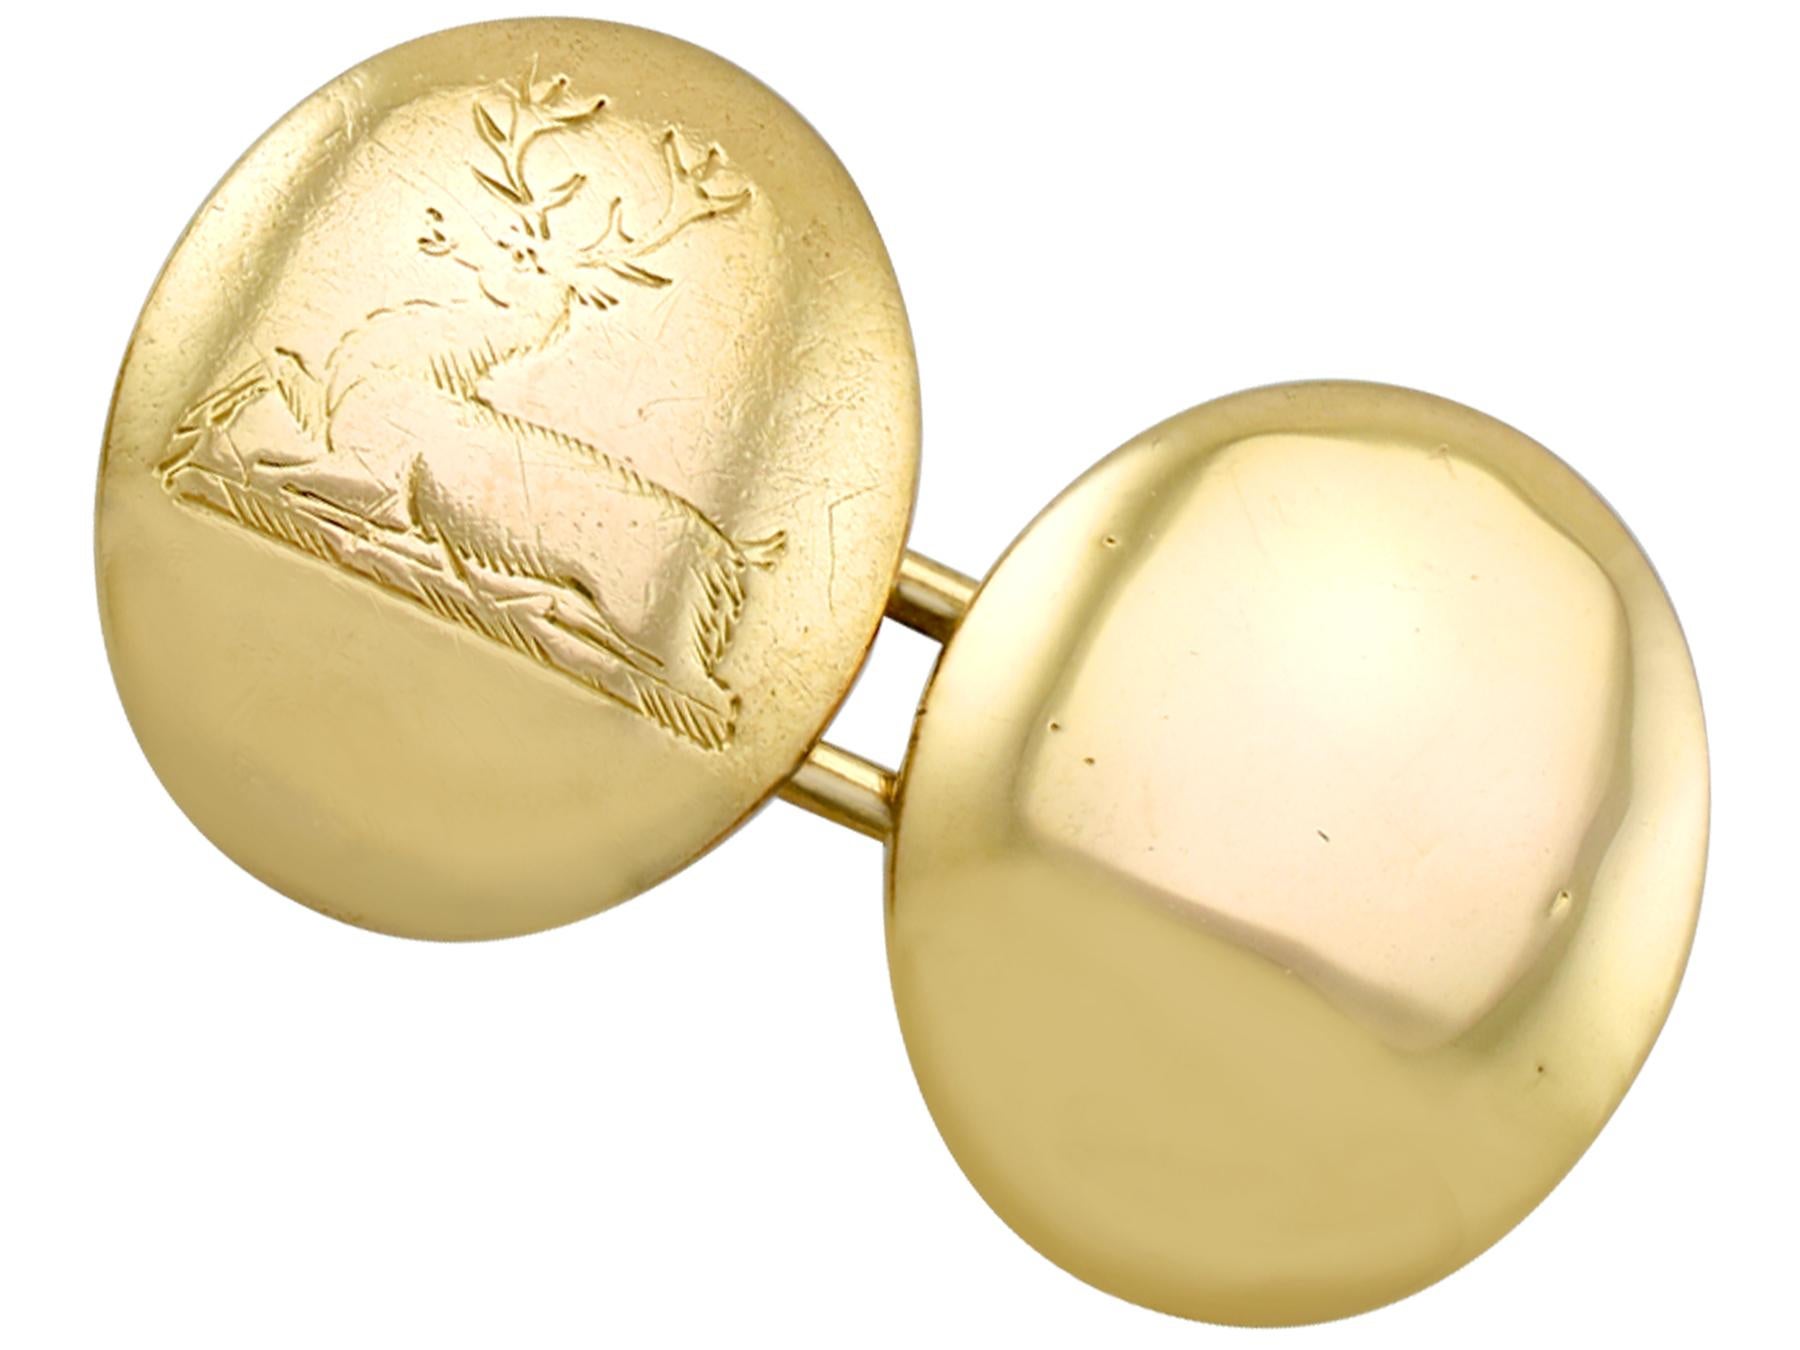 An impressive pair of antique Victorian 15 karat yellow gold gent's cufflinks with engraved crests; part of our diverse antique jewelry and estate jewelry collections.

These fine and impressive antique gold cufflinks have been crafted in 15k yellow